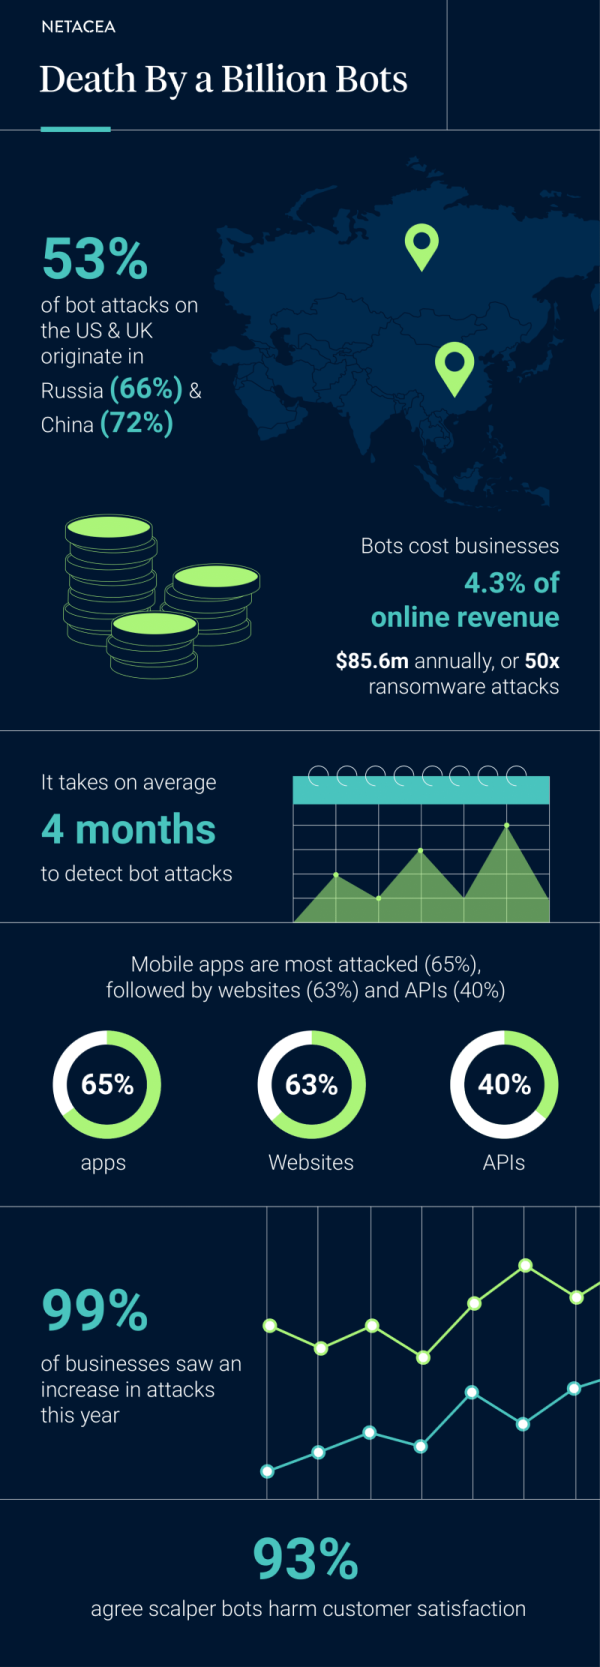 Death By a Billion Bots infographic